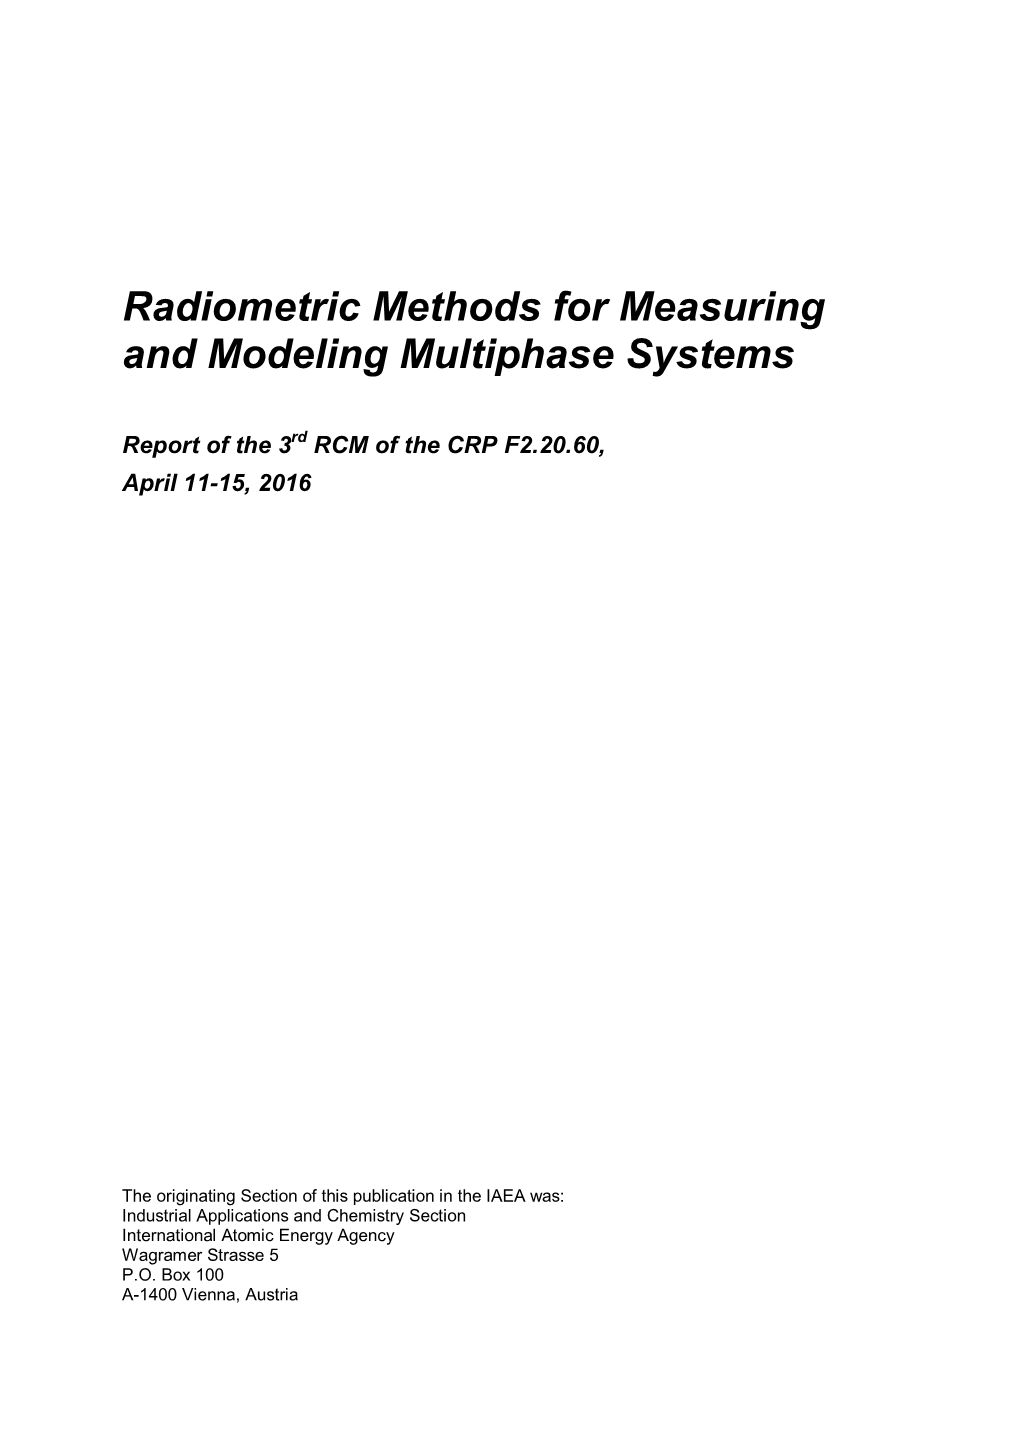 Radiometric Methods for Measuring and Modeling Multiphase Systems